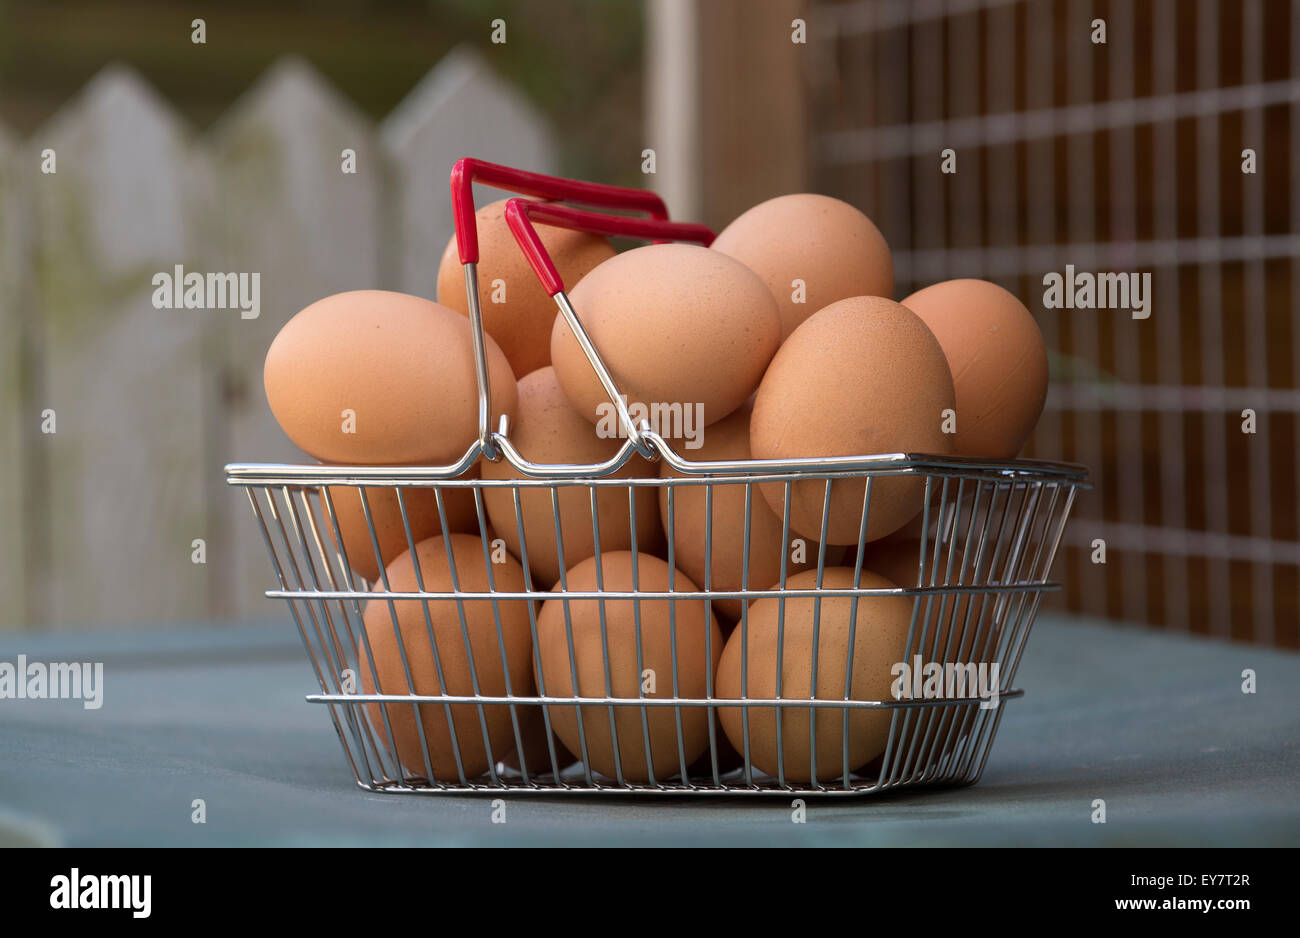 Fresh free range brown chickens eggs in a small metal wire basket with a red handle Stock Photo